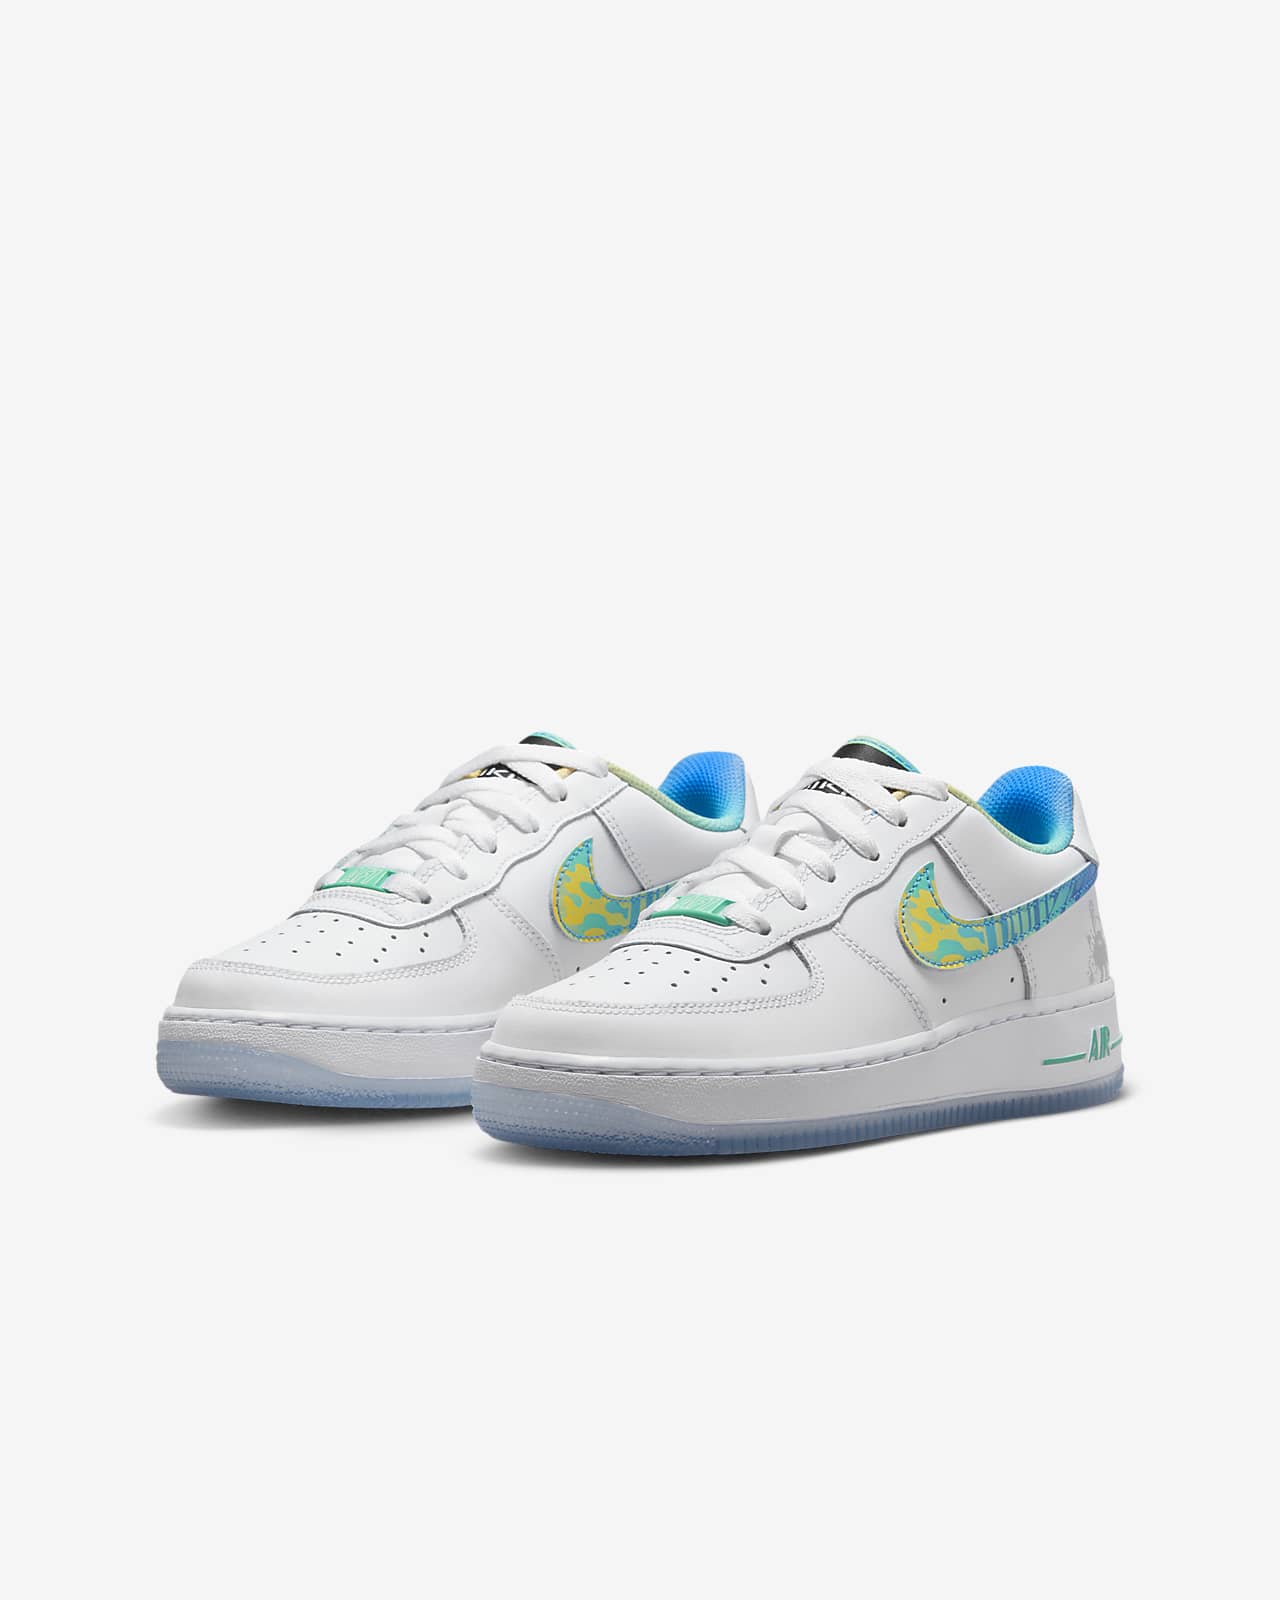 Nike Air Force 1 '07 LV8 matching sneakers for adults and kids